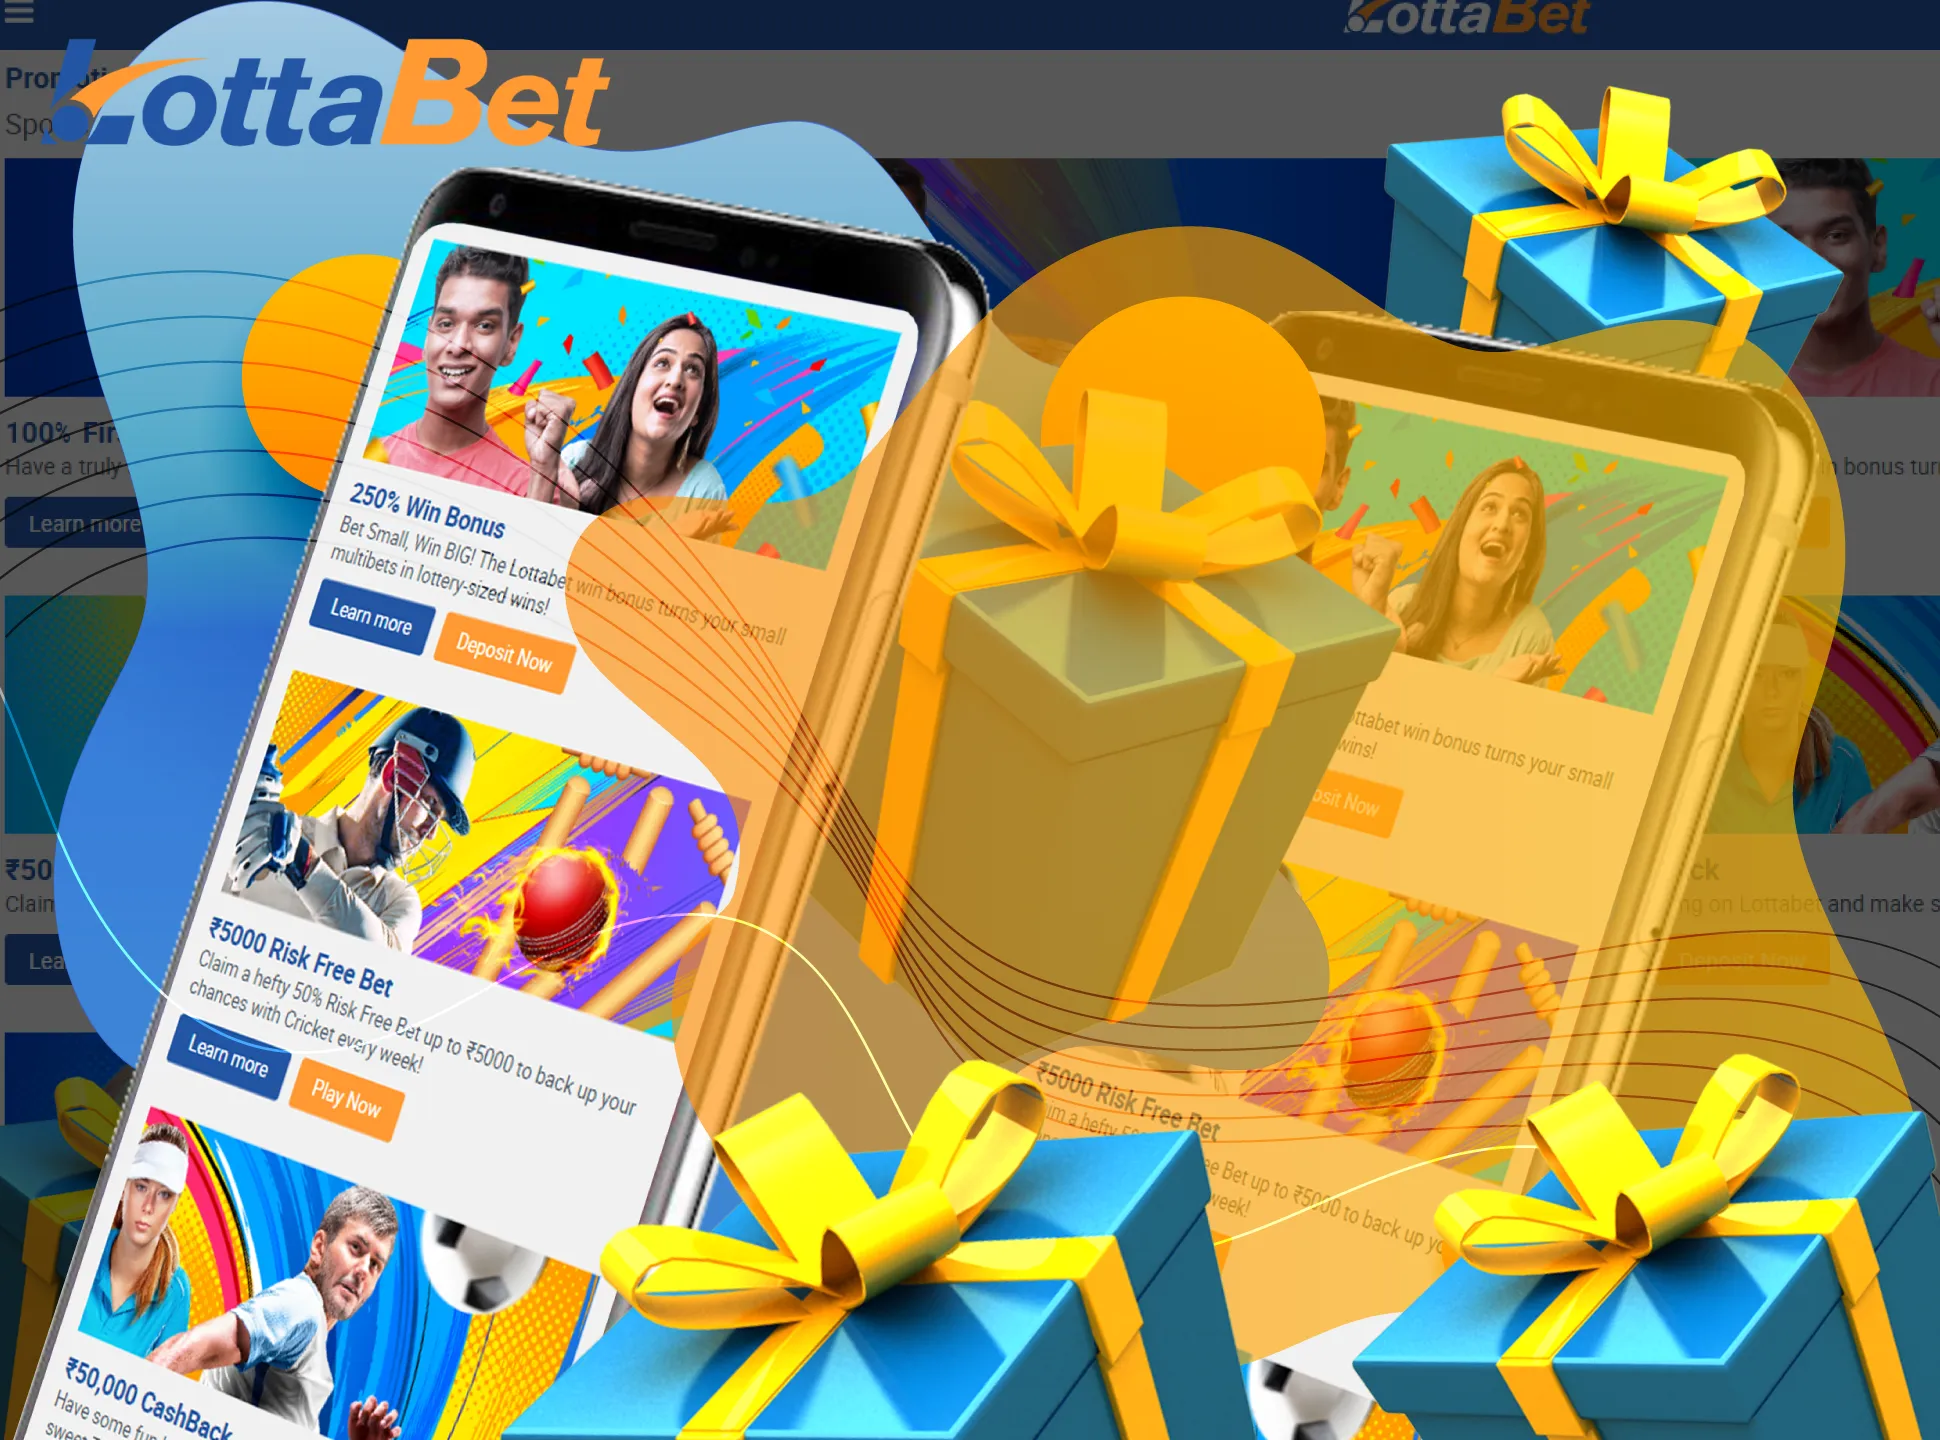 Lottabet has all the same bonuses plus some additional mobile promotions.